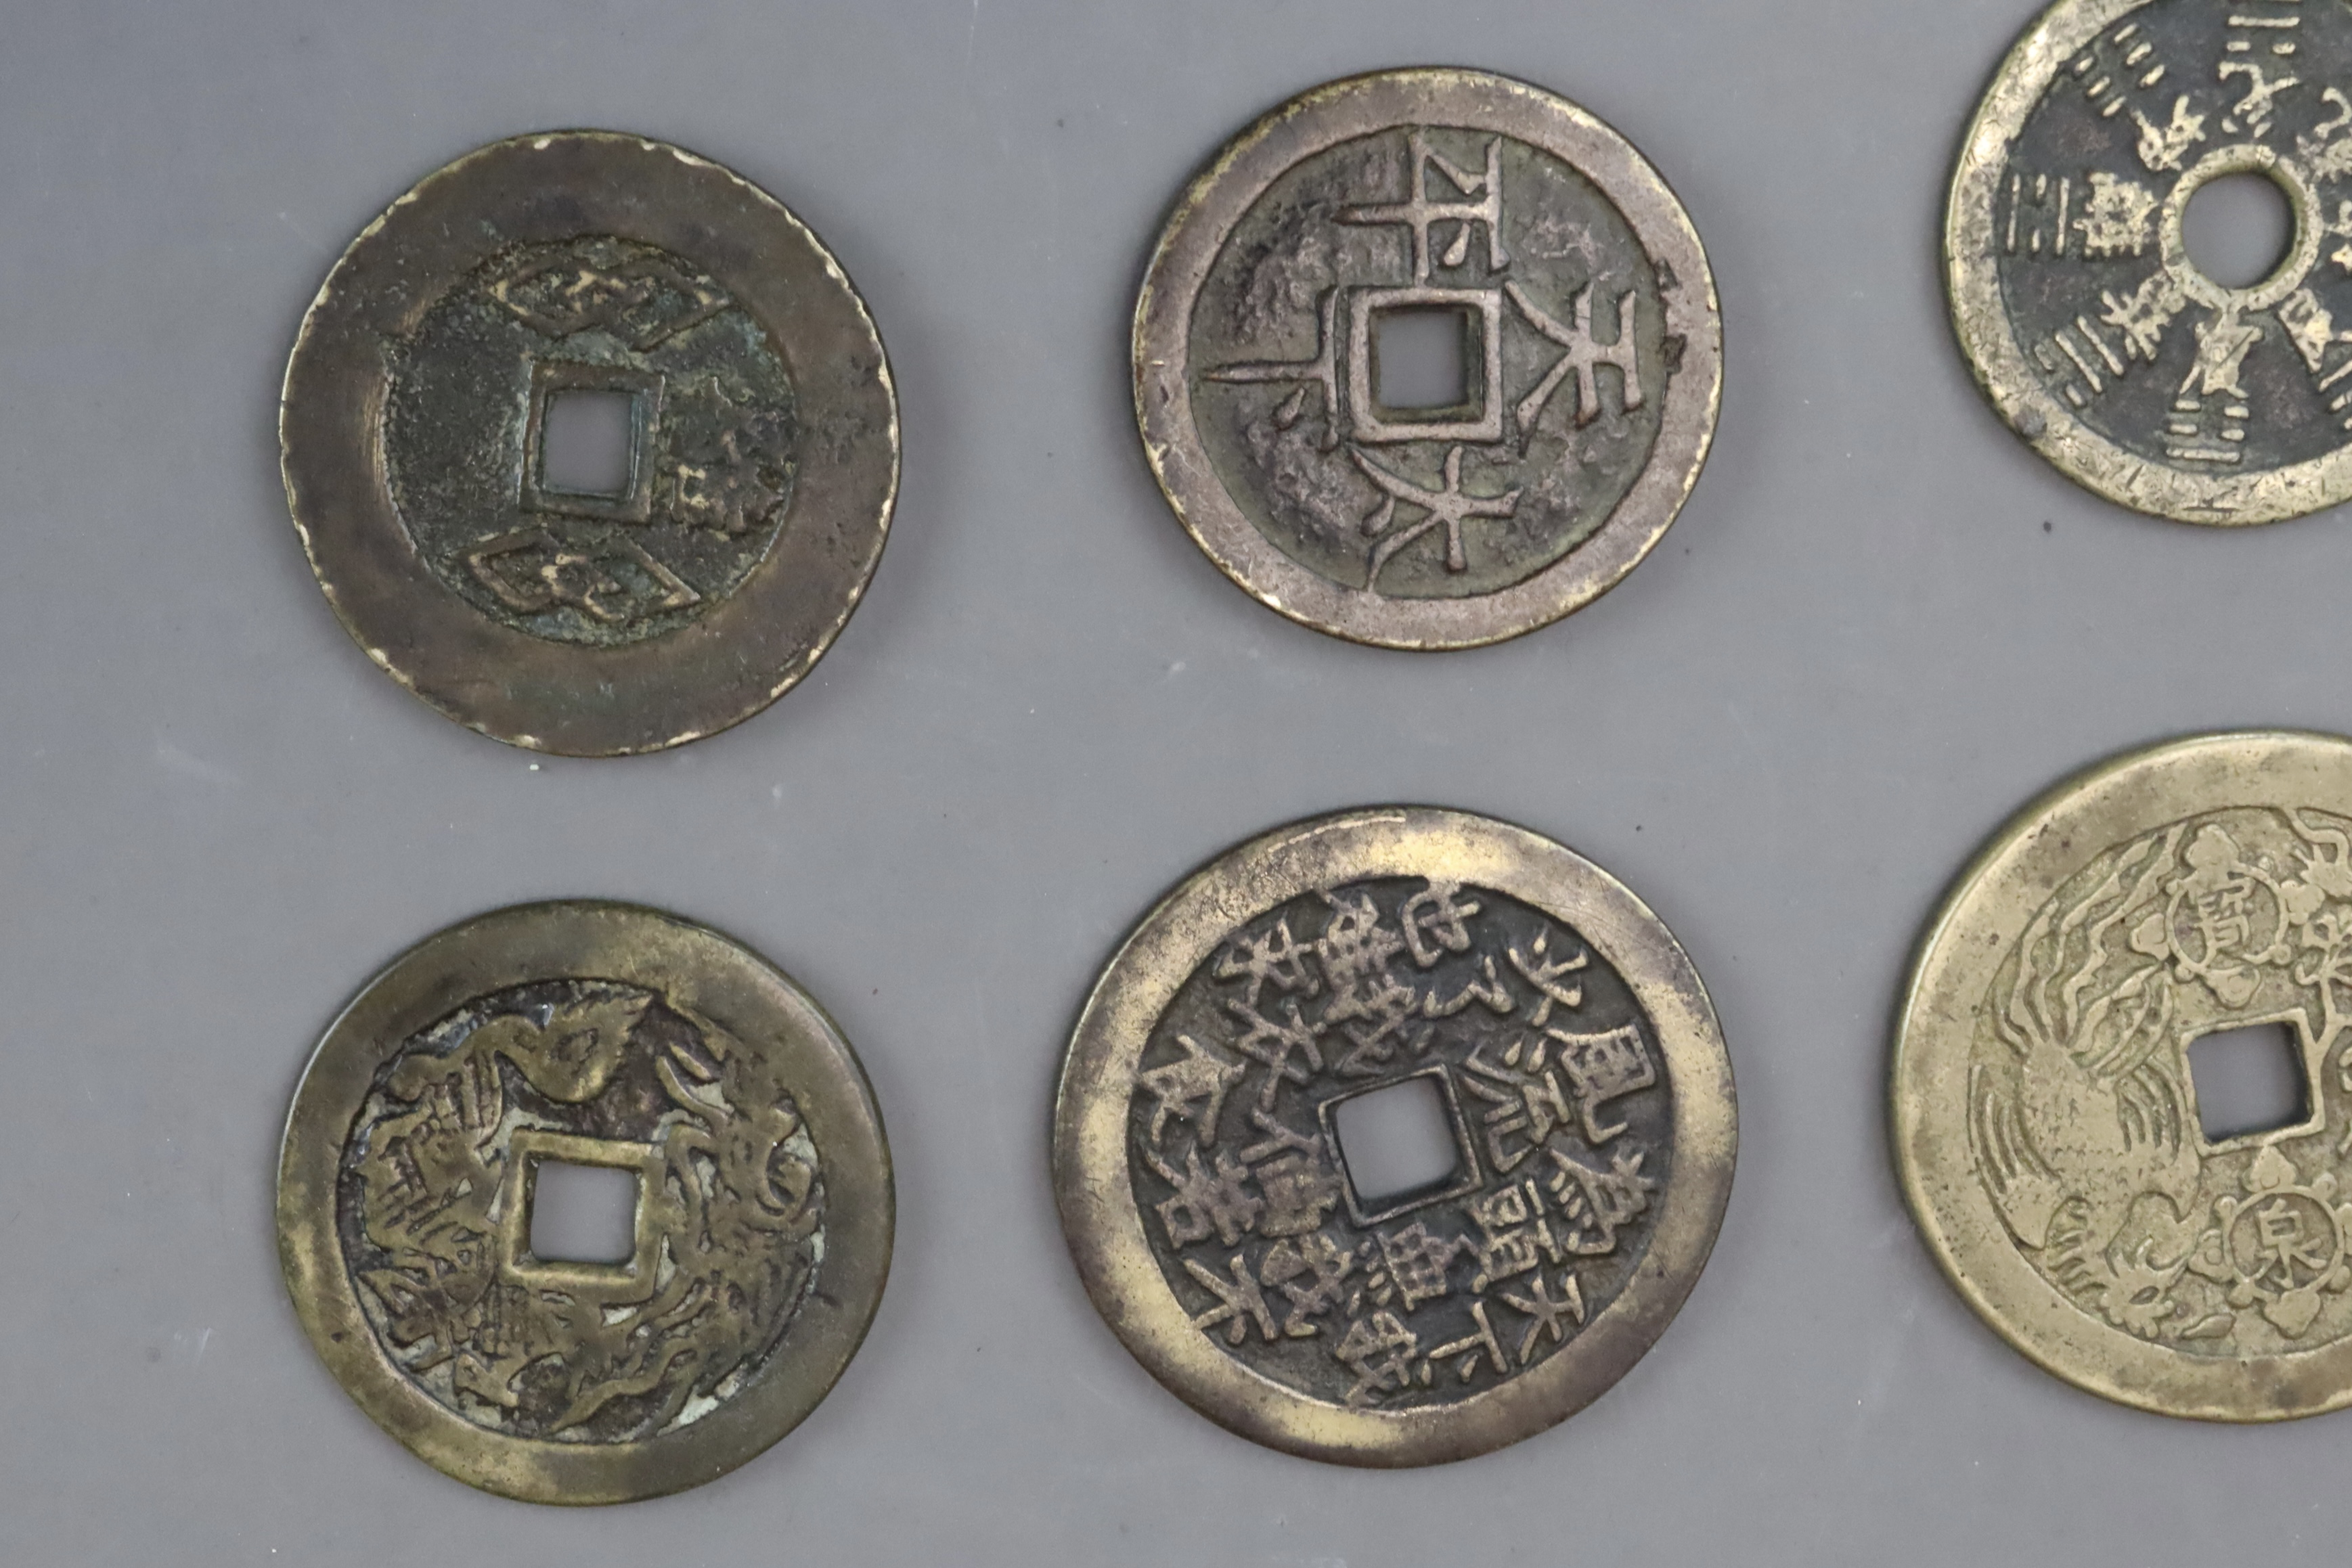 A Set of 12 Chinese Taoism Coins, Qing dynasty - Image 5 of 8